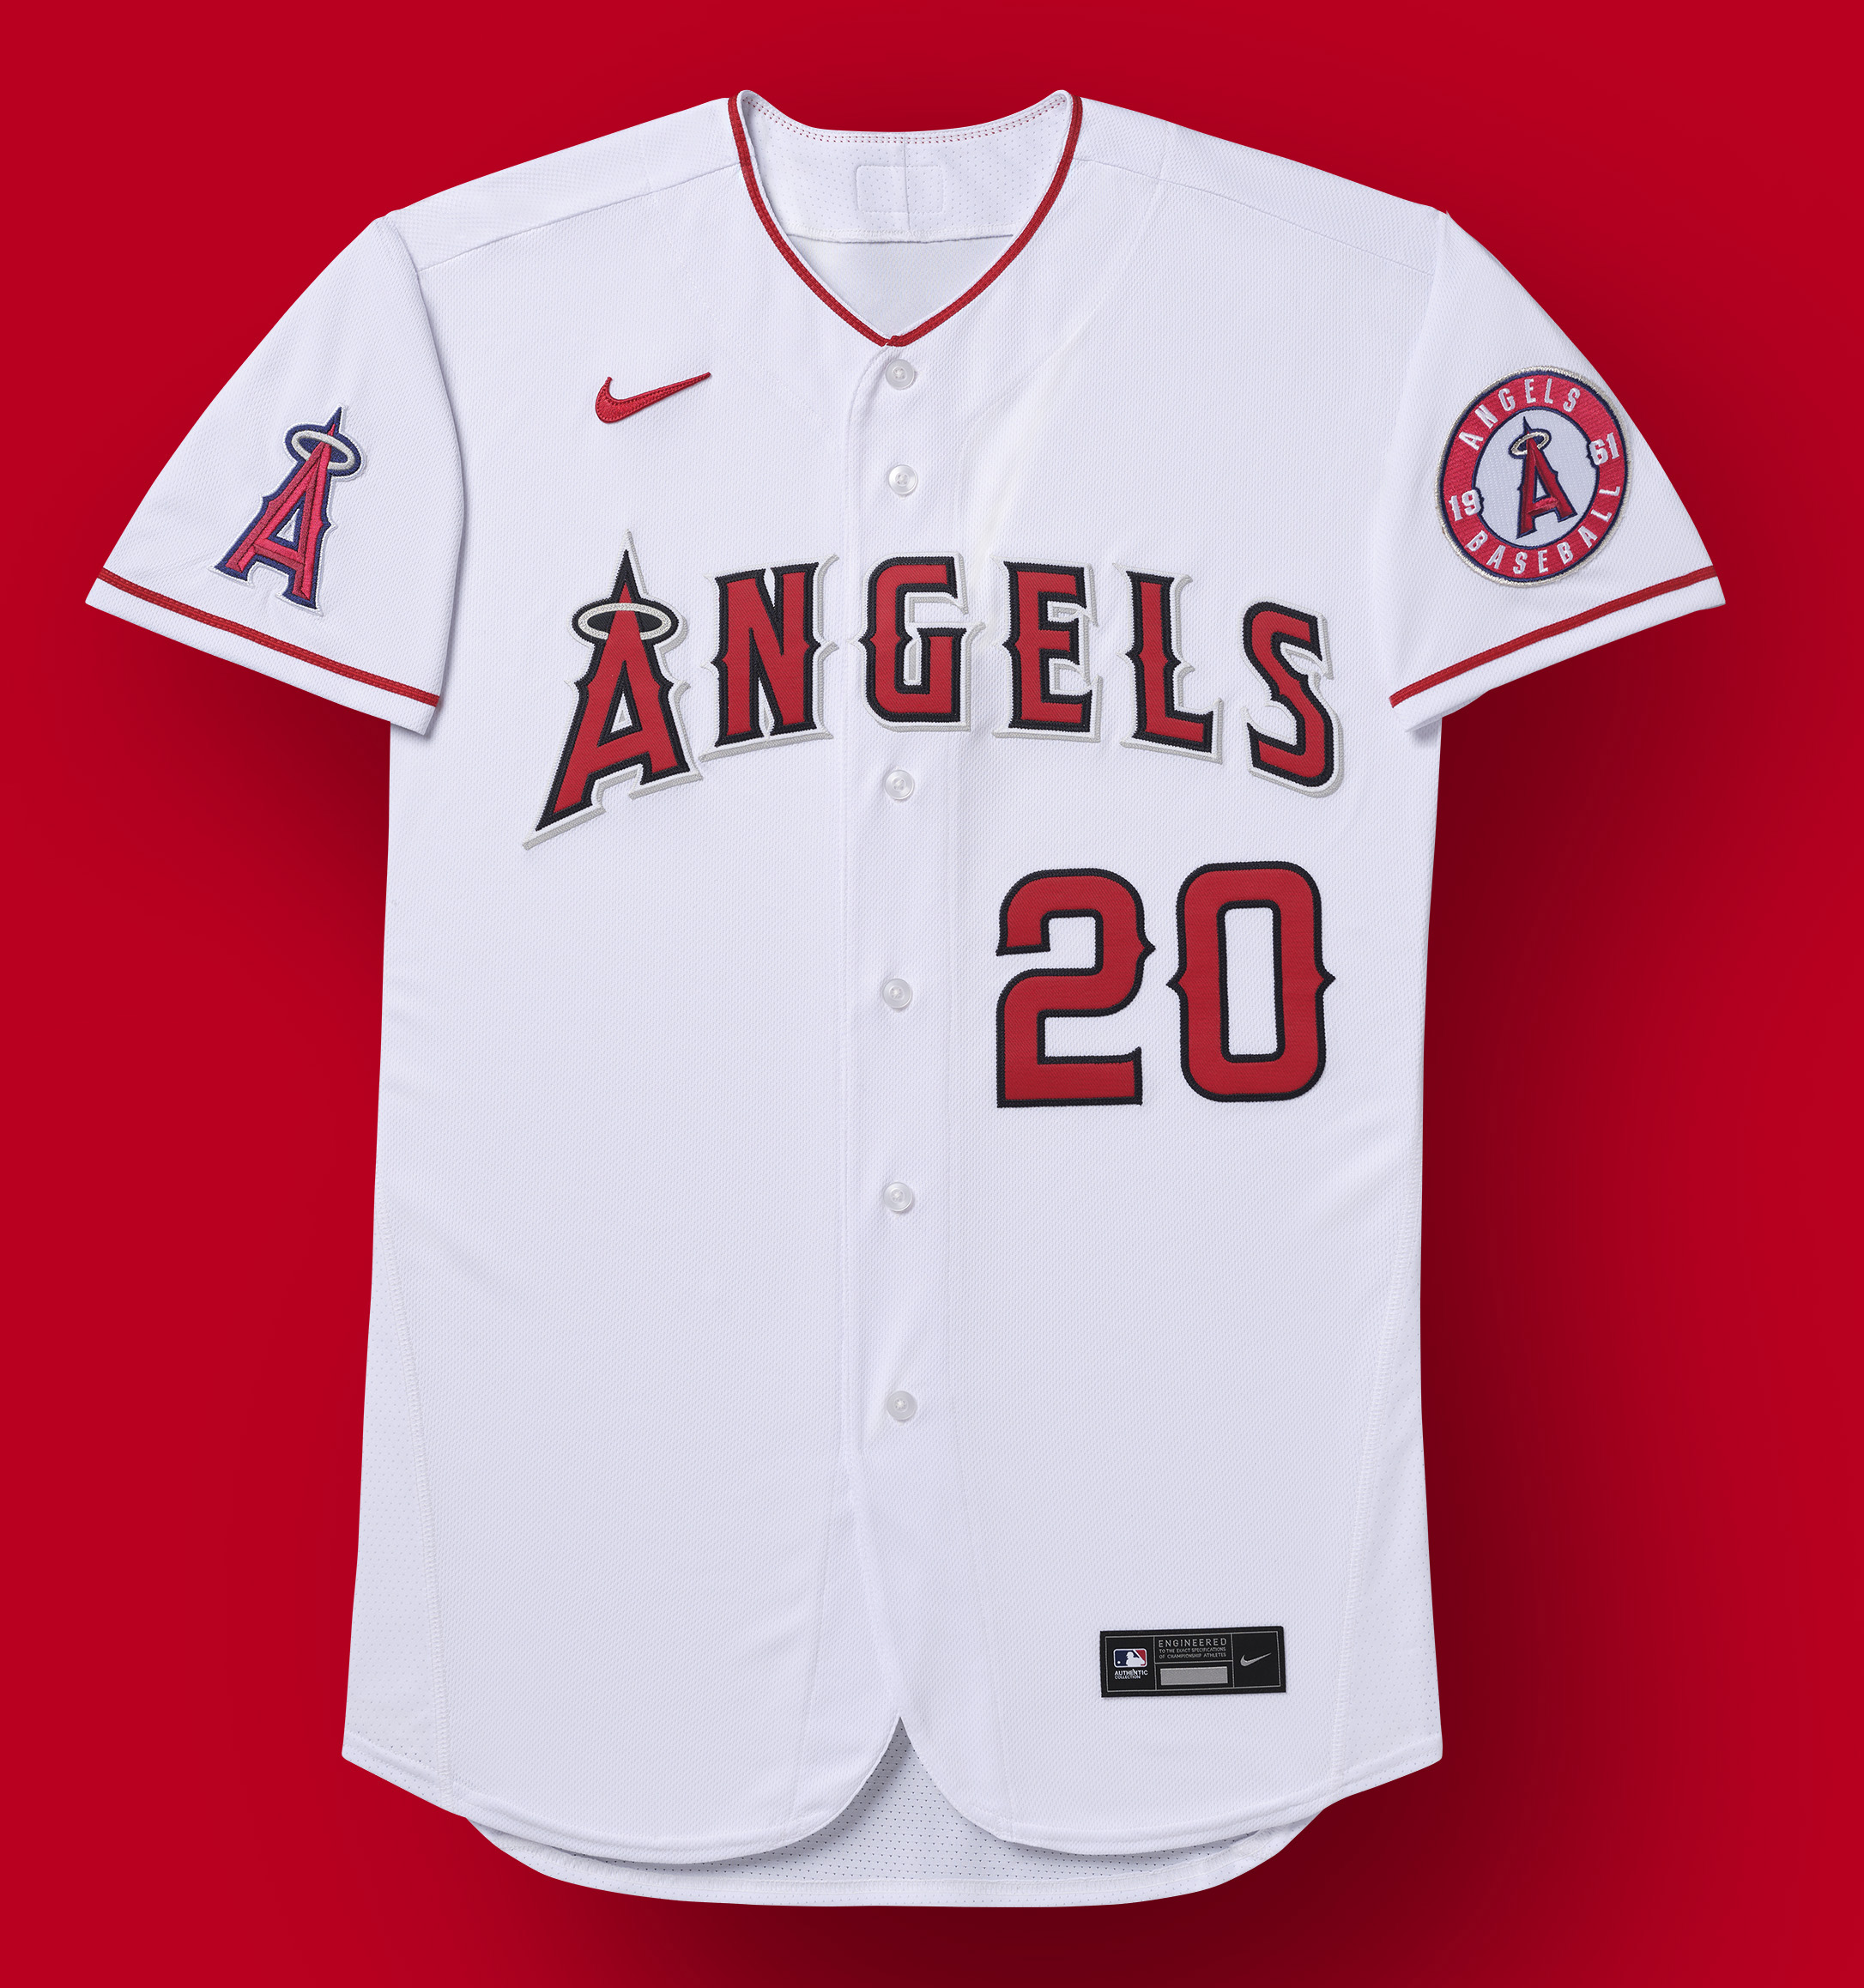 Baseball Purists Are Very Upset Over Nike Logo On The New MLB Jerseys